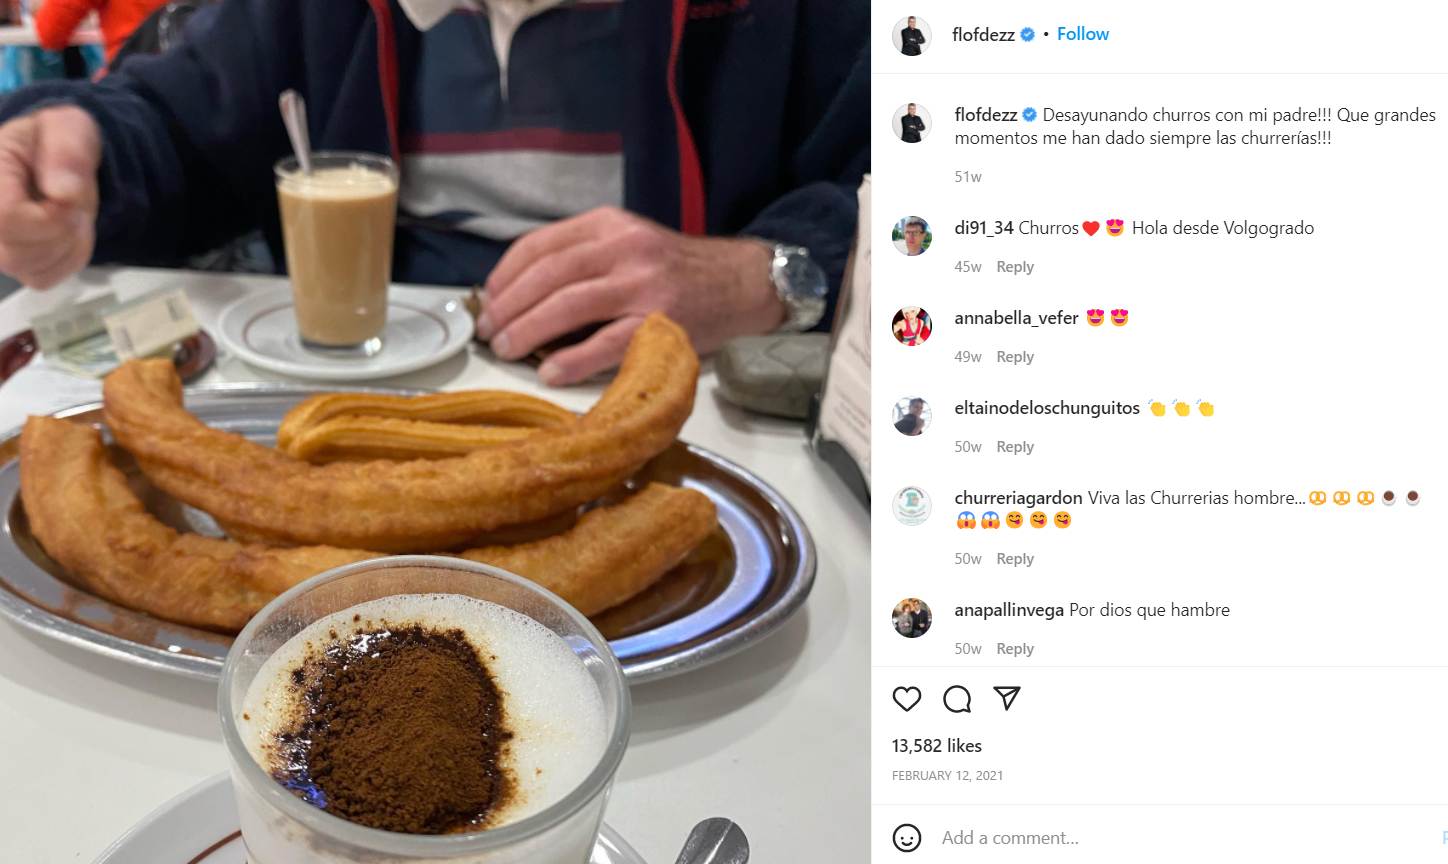 Florentino-Fernandez shares churros with his father